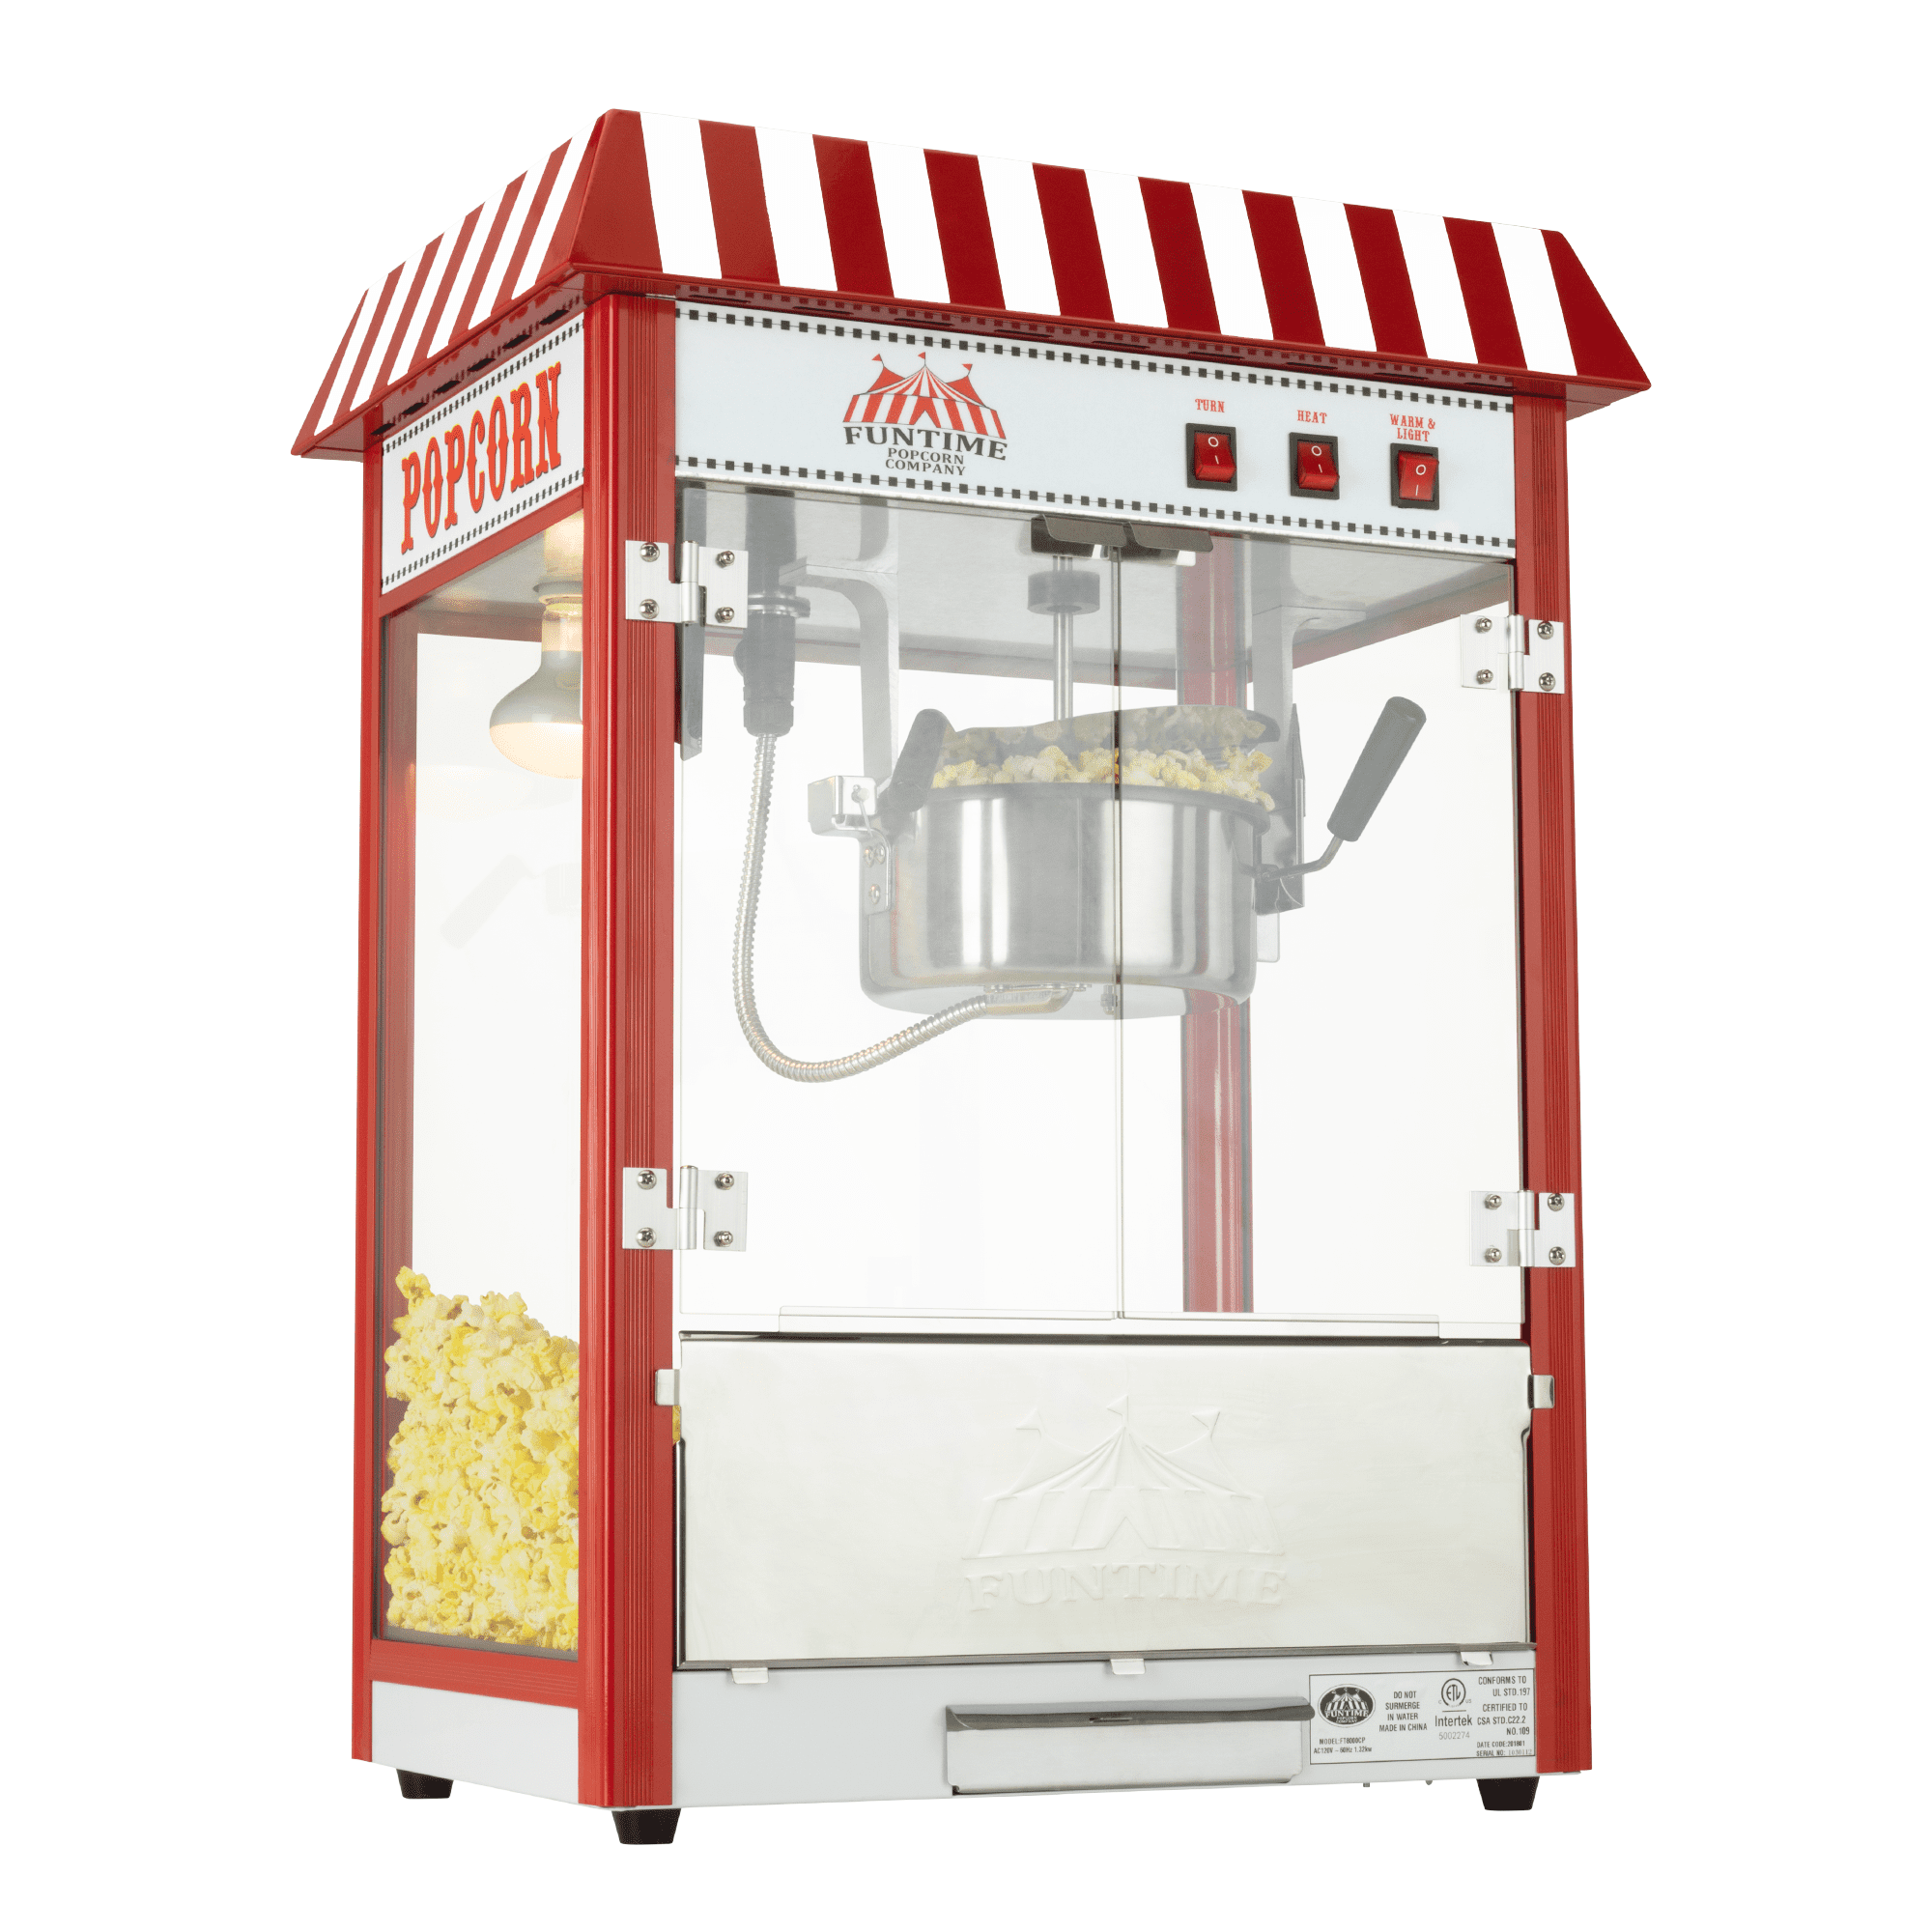 Paragon TP-4 oz Theater Style Popcorn Machine and Matching Cart Combo